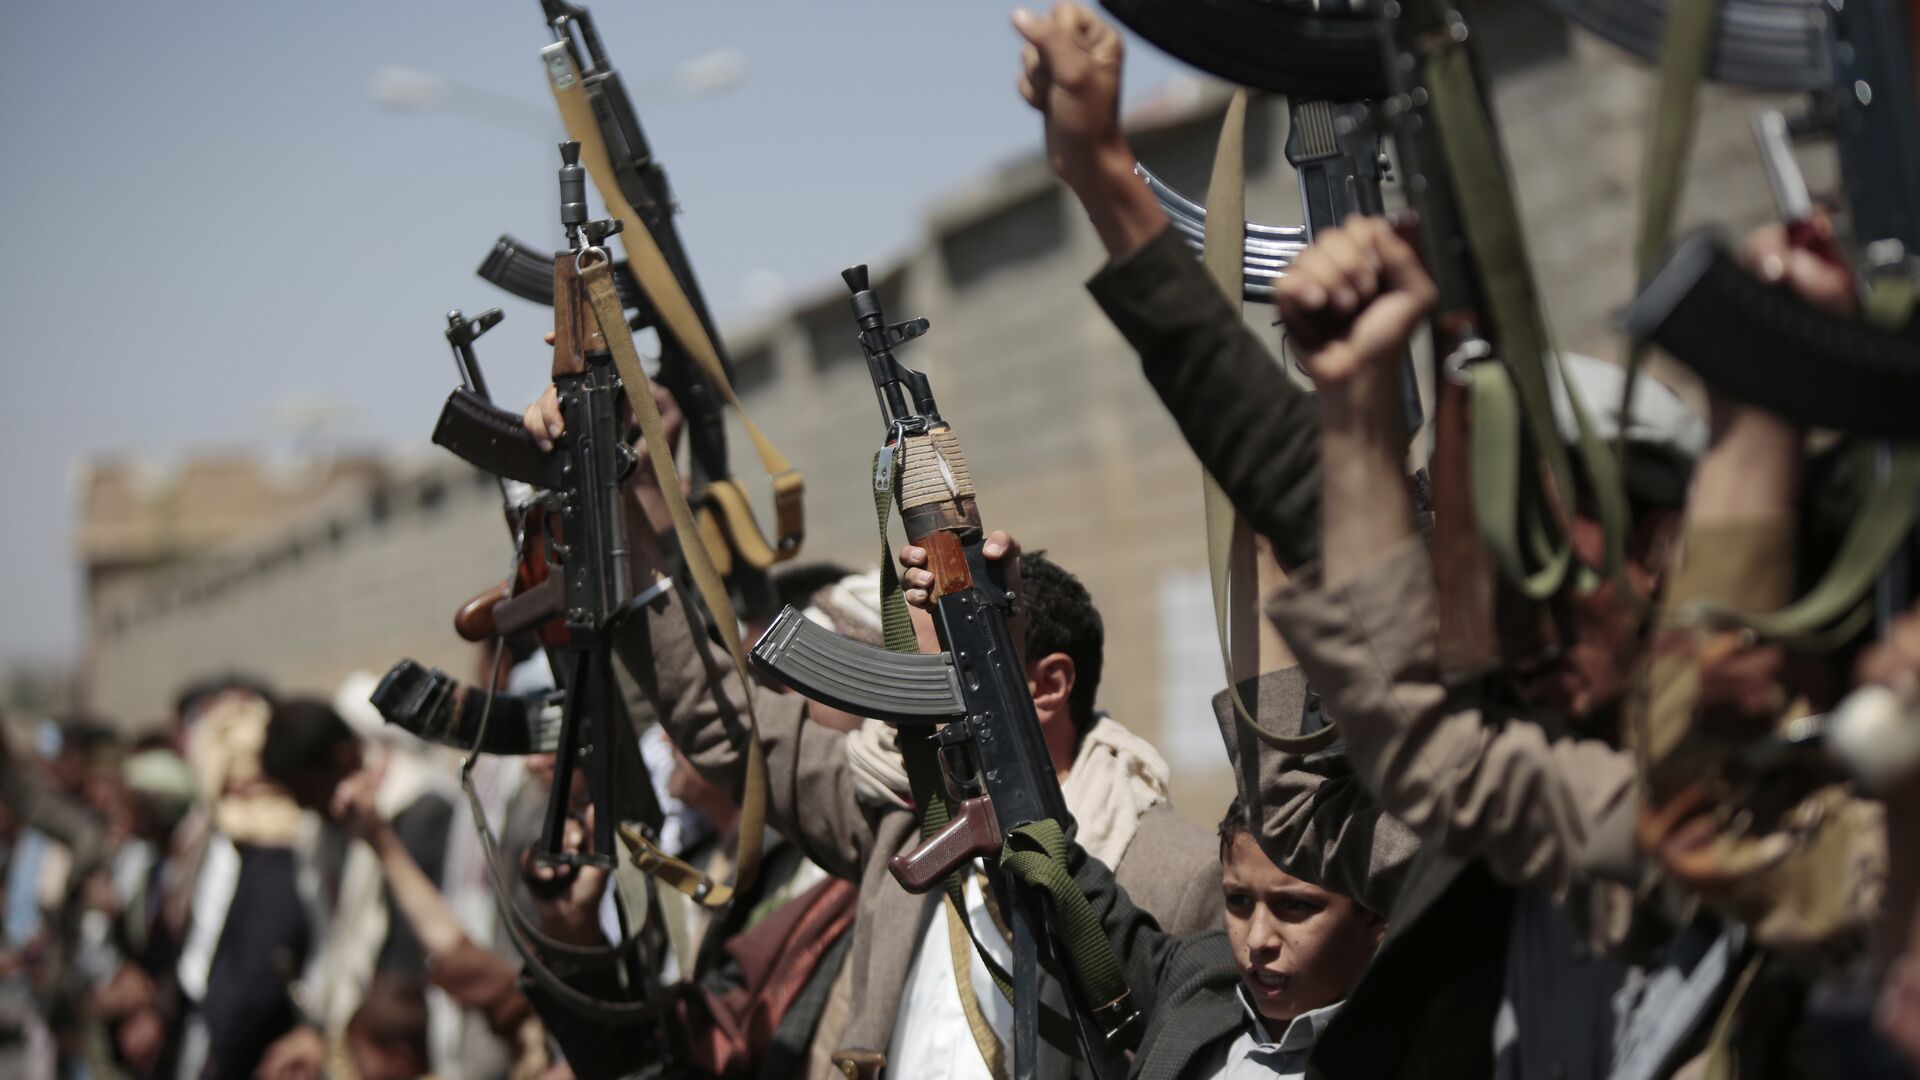 Tribesmen loyal to Houthi rebels, hold their weapons as they chant slogans during a gathering aimed at mobilizing more fighters into battlefronts in several Yemeni cities, in Sanaa, Yemen, Sunday, Oct. 2, 2016 - Sputnik International, 1920, 31.01.2022